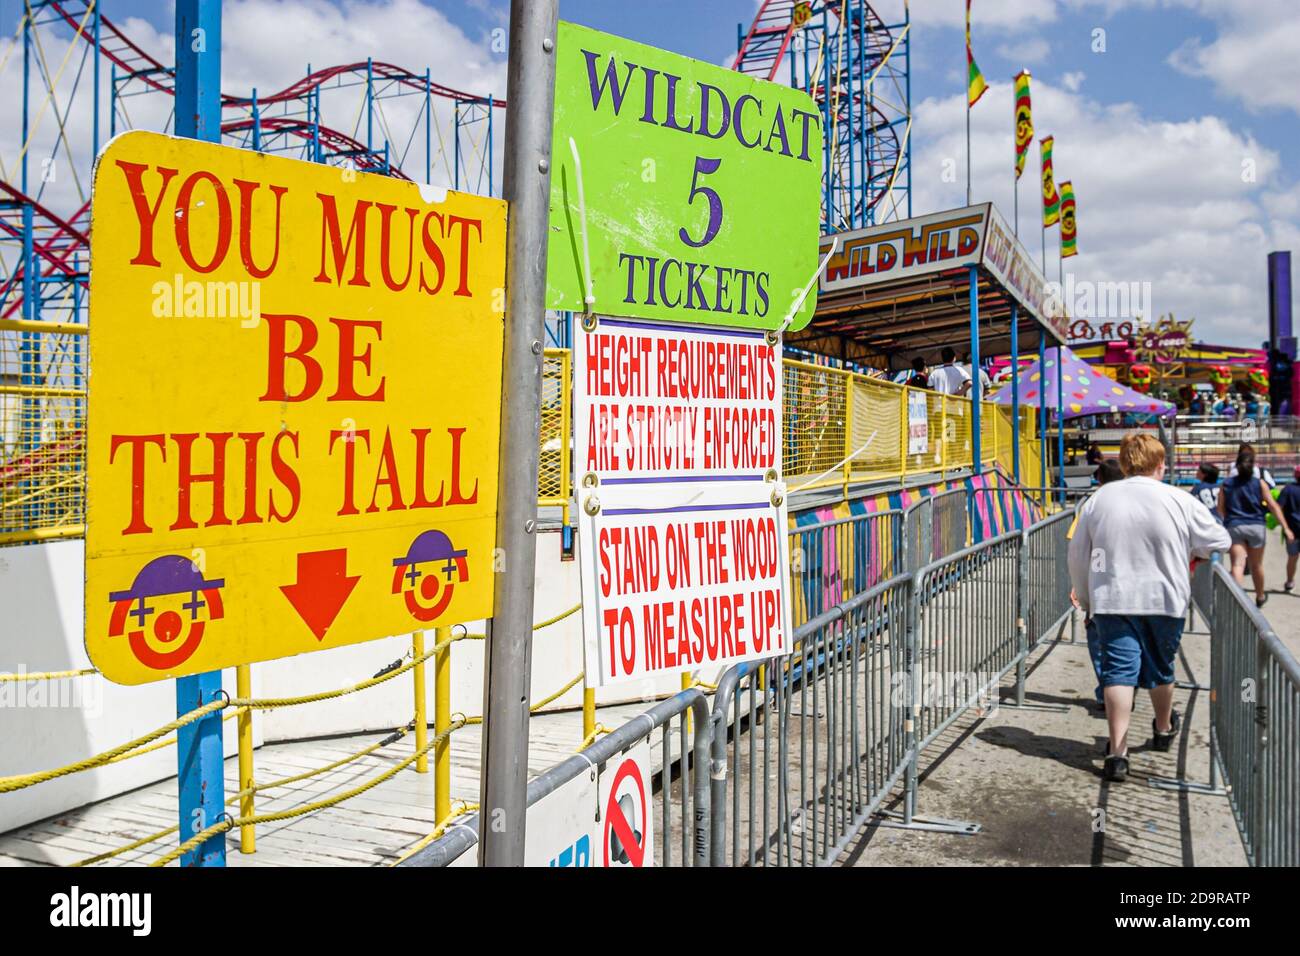 Miami Florida,Dade County Fair & Exposition,annual event carnival midway ride signs height requirement, Stock Photo